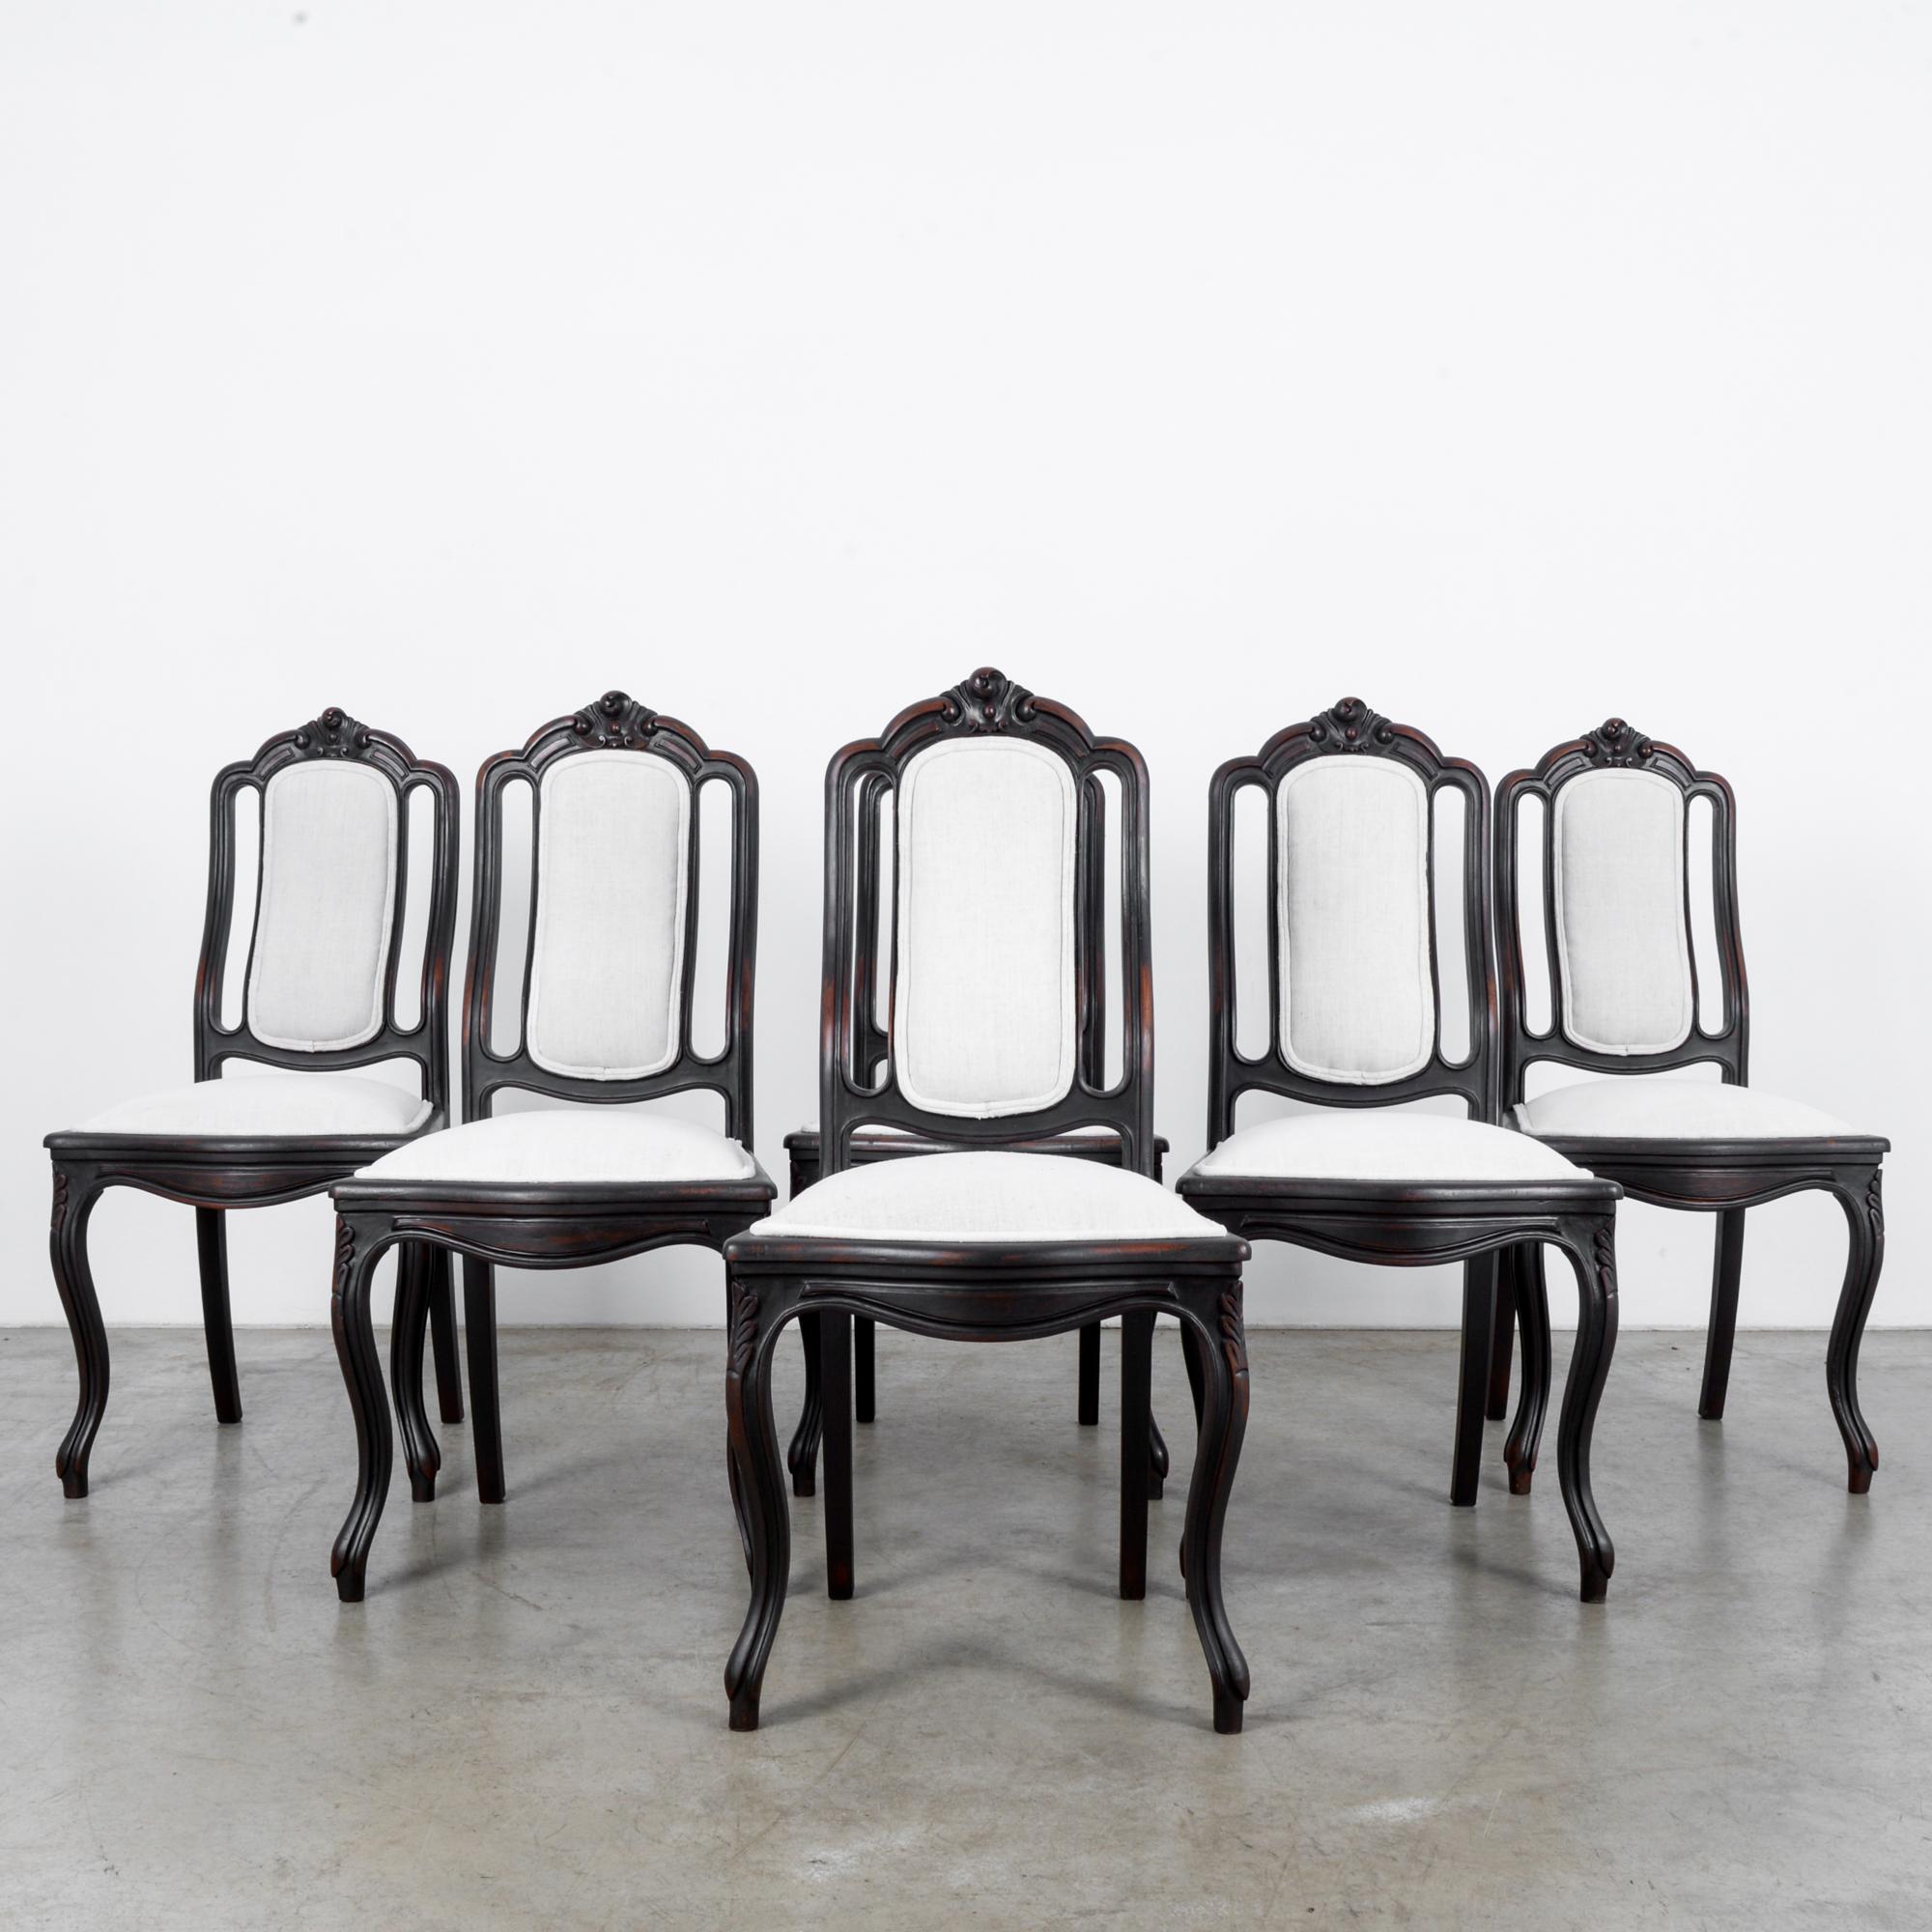 A set of six wooden upholstered dining chairs from France, circa 1900. Rich, dark wood offset by the pale gray upholstery of the seats and backs. Plush pillowing of the seats, the natural curve of the back culminating in a floral crest, and cabriole